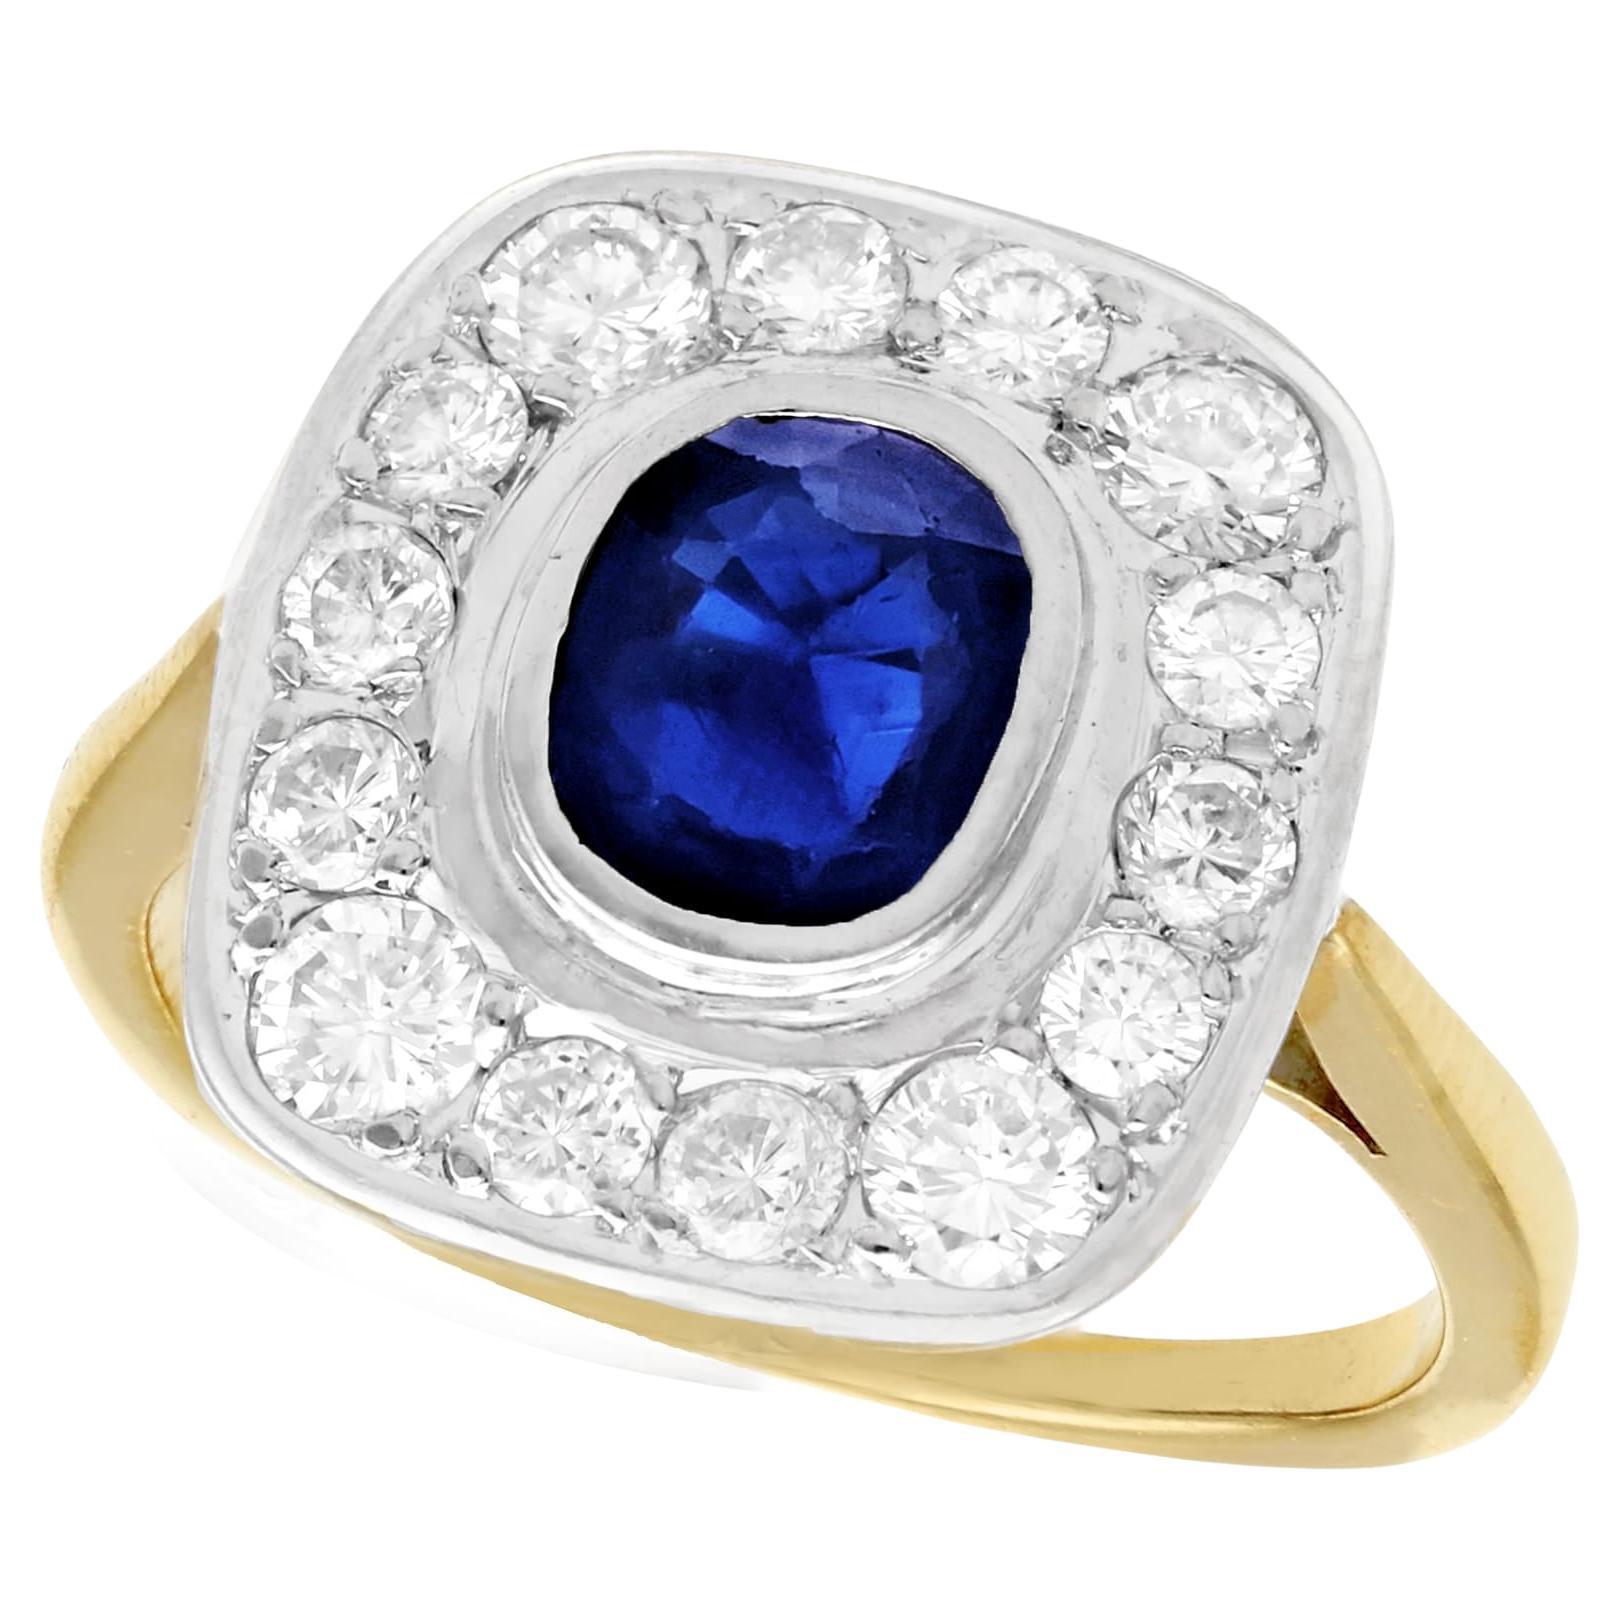 Vintage French 1.02 Carat Sapphire and 1.13 Carat Diamond Yellow Gold Ring For Sale